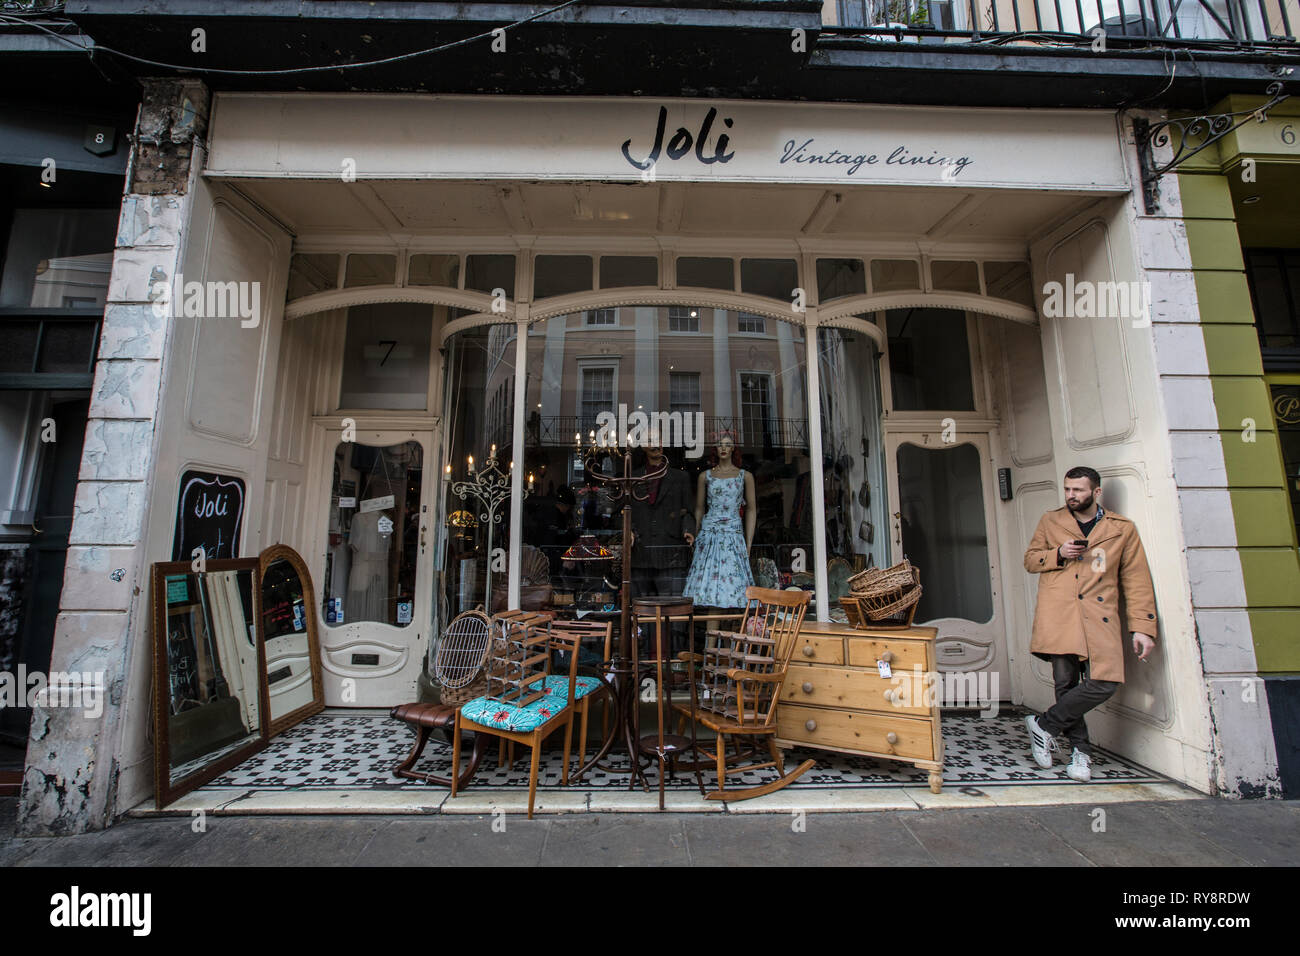 Joli Vintage Living in Greenwich, boutique specialising in Vintage furniture, retro and designer clothing and home wear, southeast London, England, UK Stock Photo